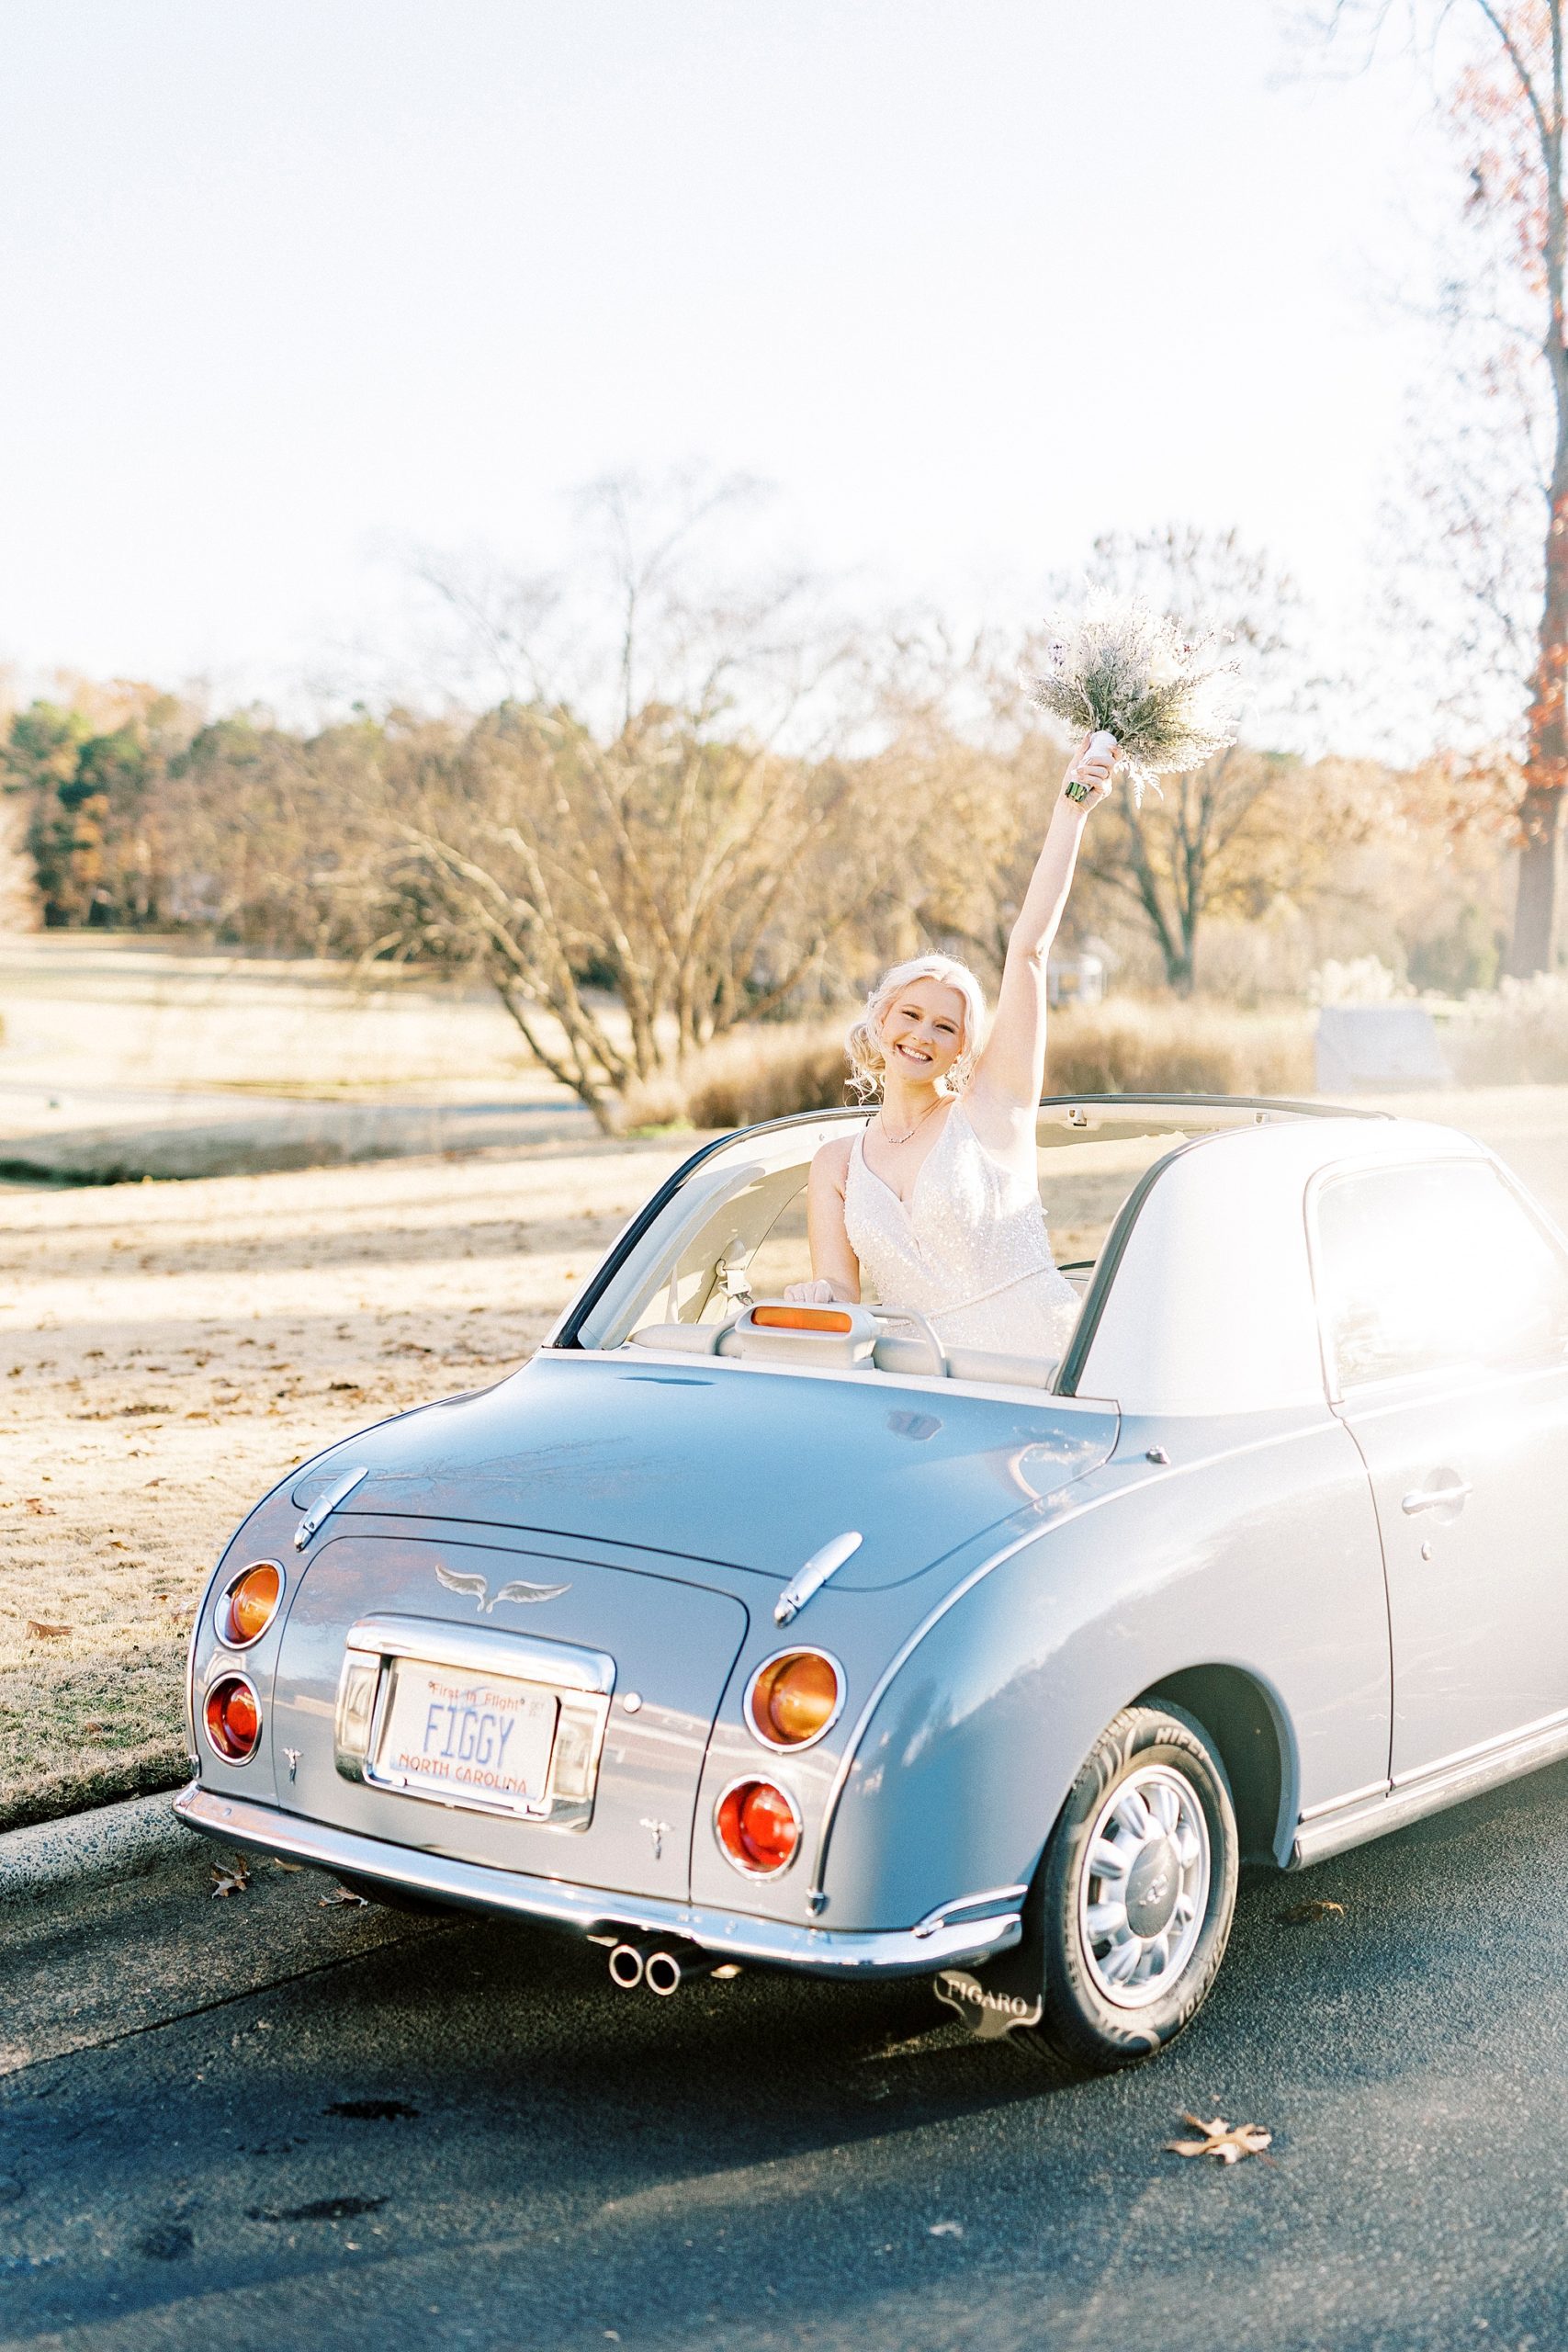 bride waves holding bouquet with pinecone accents in the back of Charlotte the Figgy